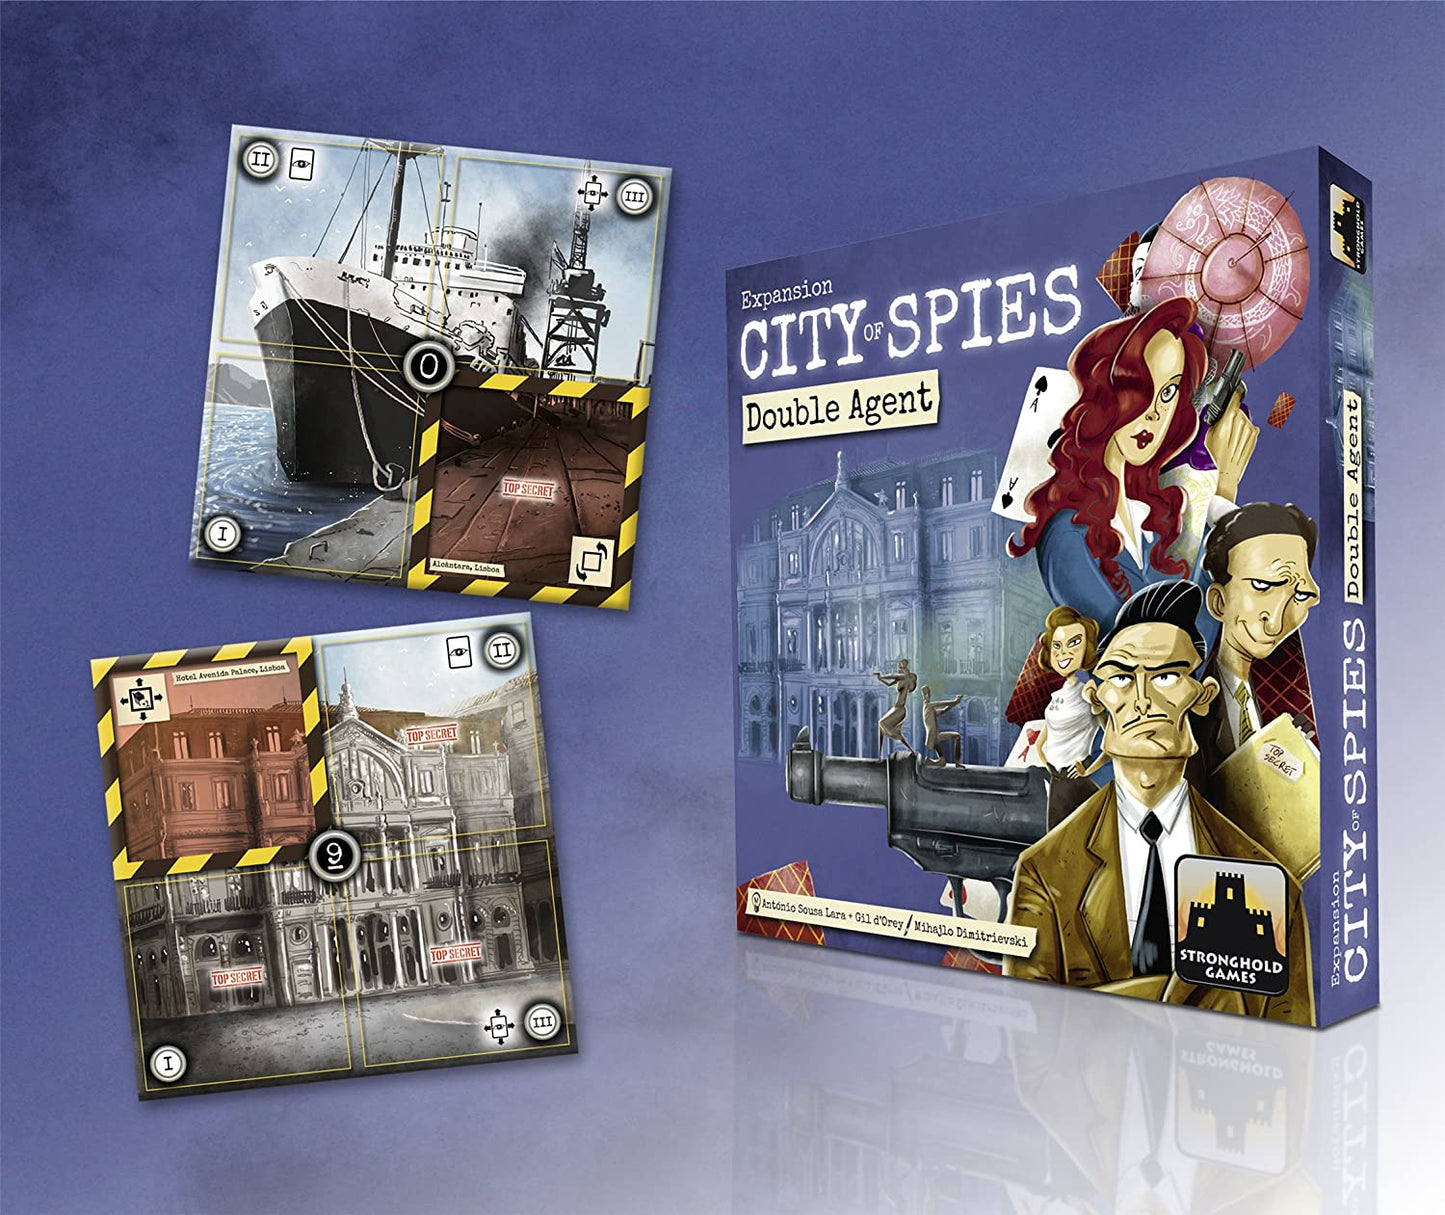 City of Spies Double Agent - Expansion Stronghold Games